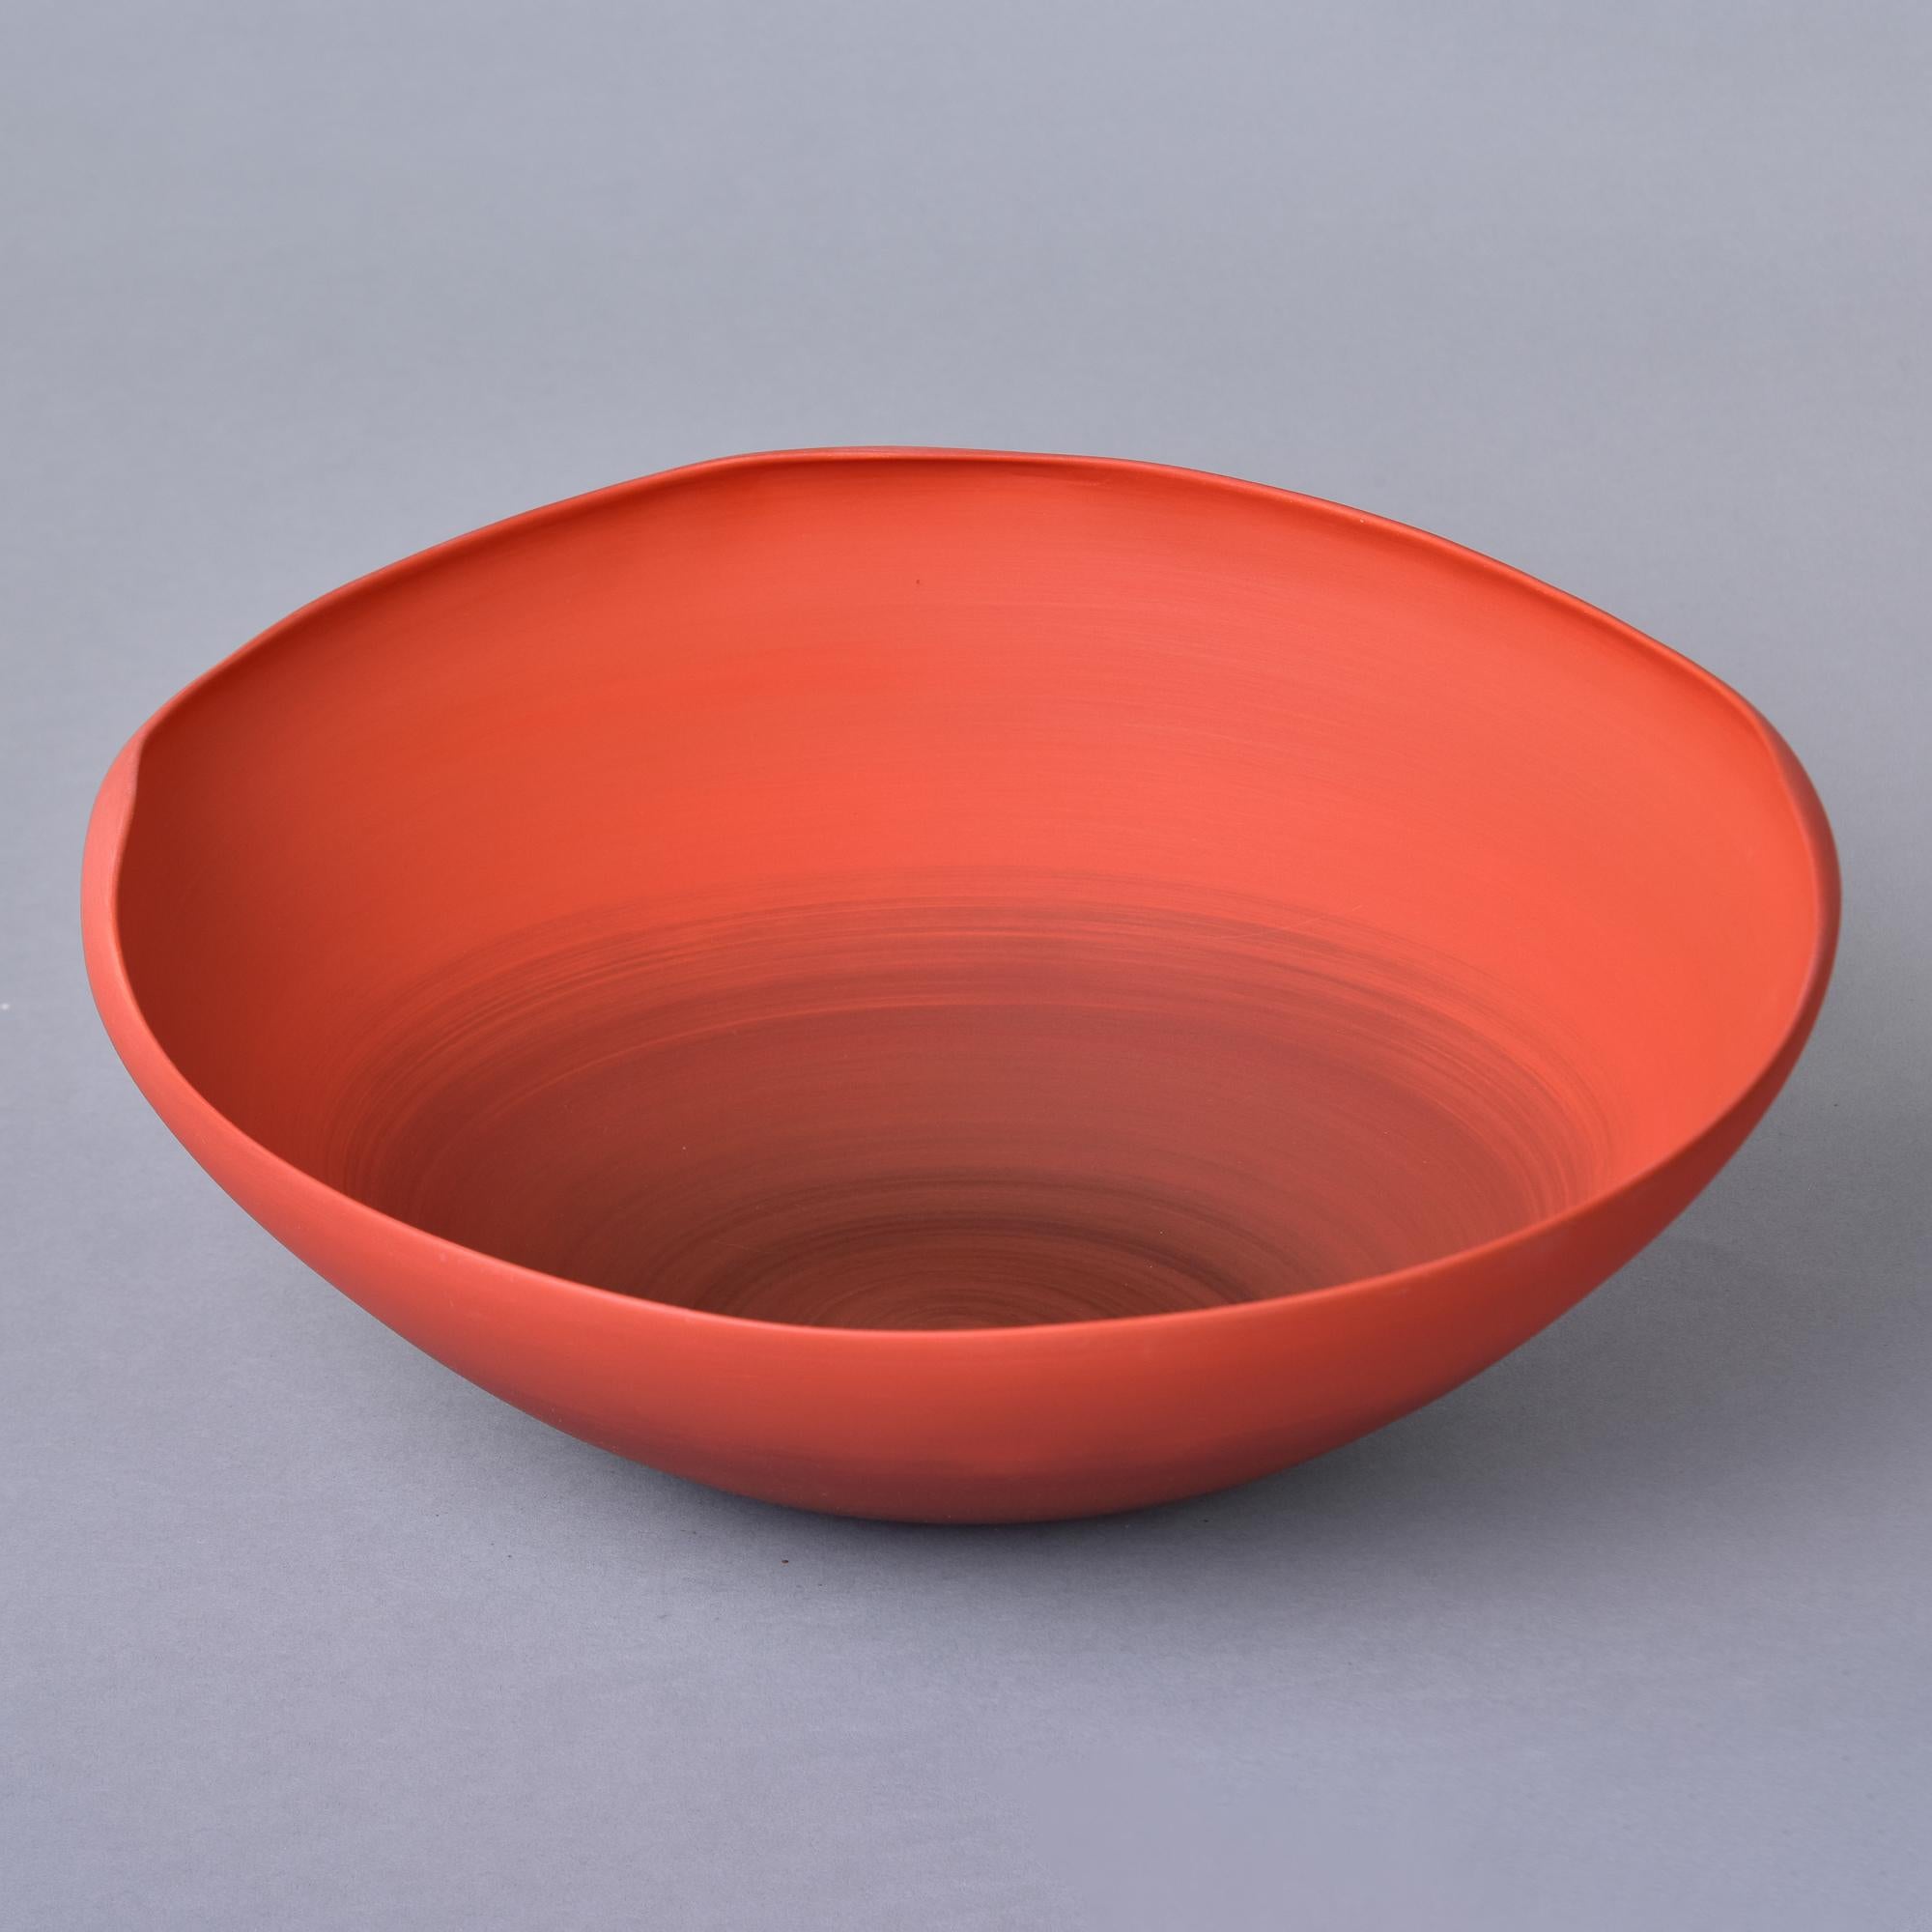 New and imported from Italy, this art pottery bowl by Rina Menardi is a thin-walled bowl with an irregular rim and subtle ombre-style poppy red glaze. Underside of base has maker’s mark. New with no flaws found. Other styles, colors and sizes by